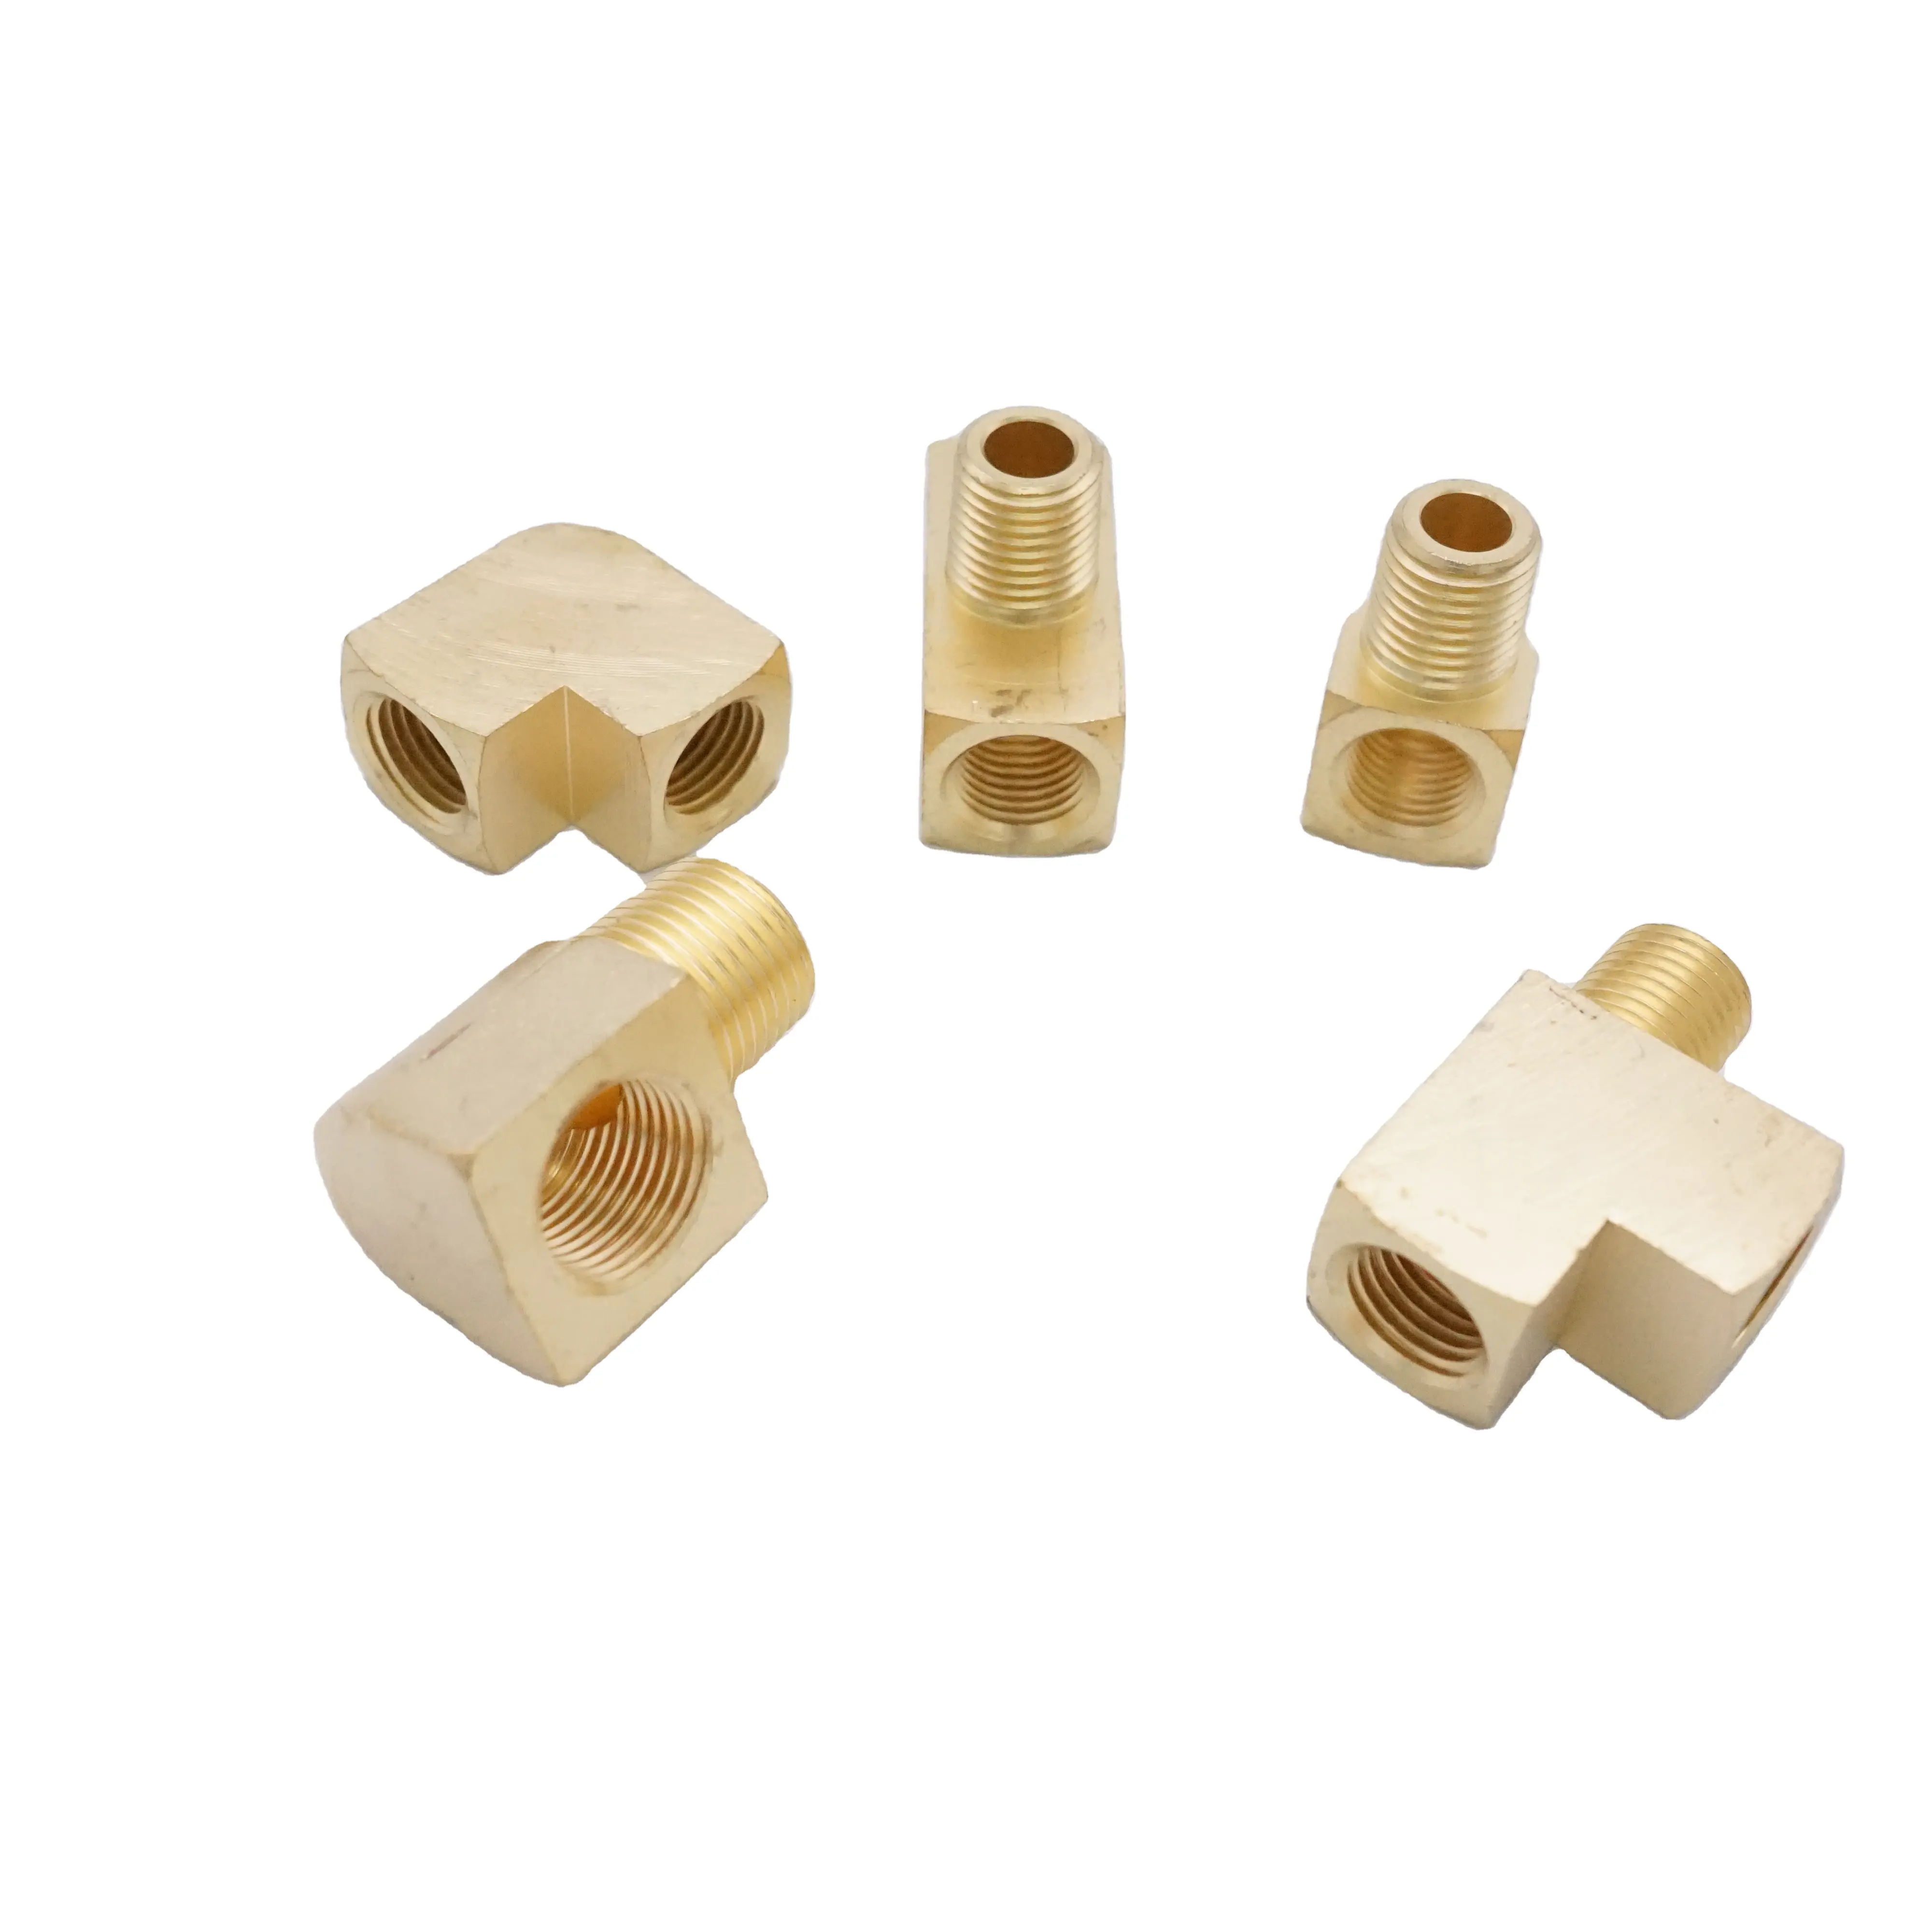 Brass pipe joint bar 90 degree elbow tee is used in various scenes such as refrigeration